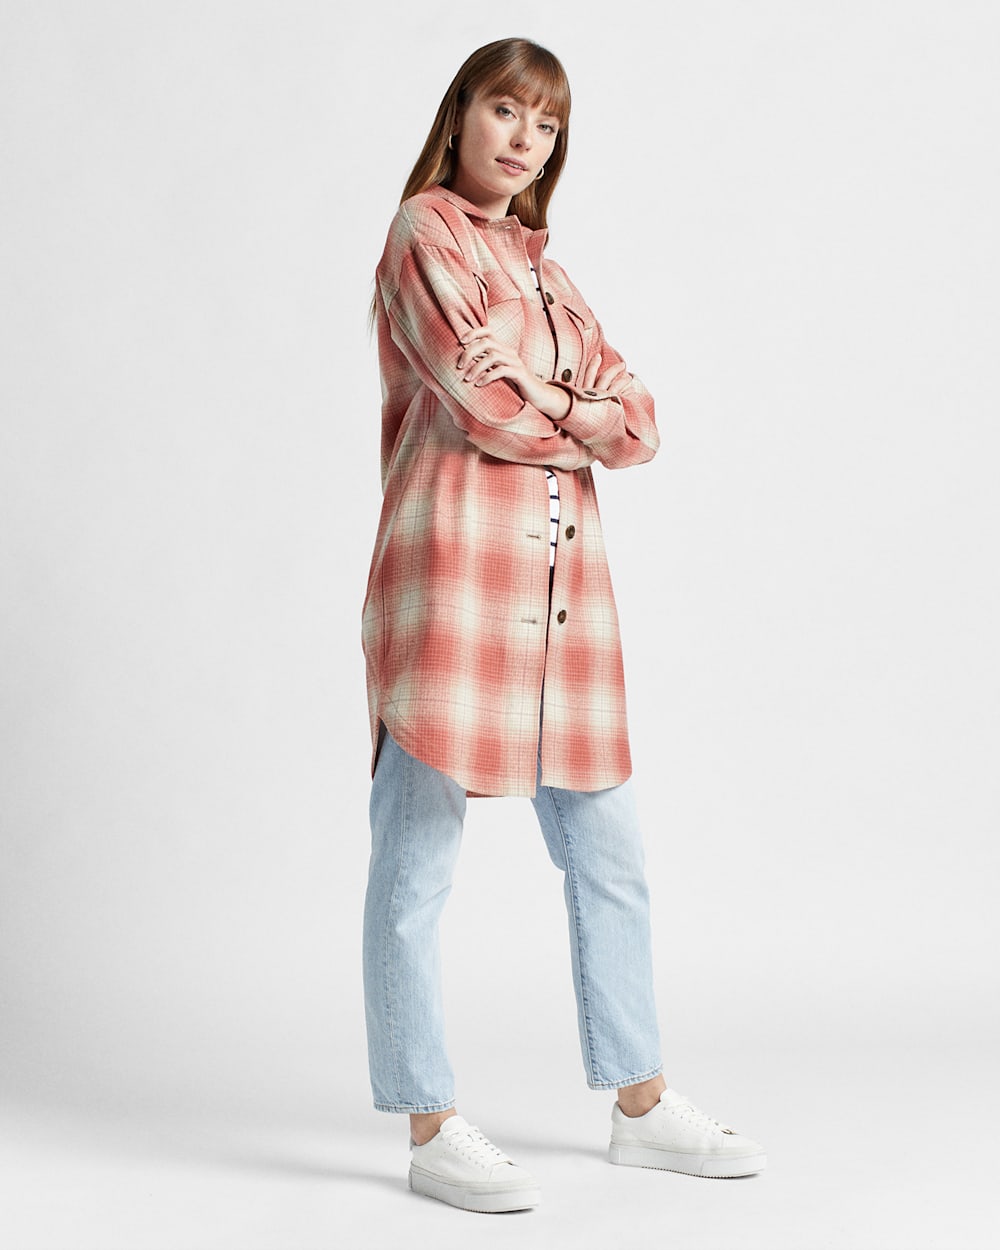 ALTERNATE VIEW OF WOMEN'S WOOL OVERSHIRT IN CORAL OMBRE PLAID image number 7